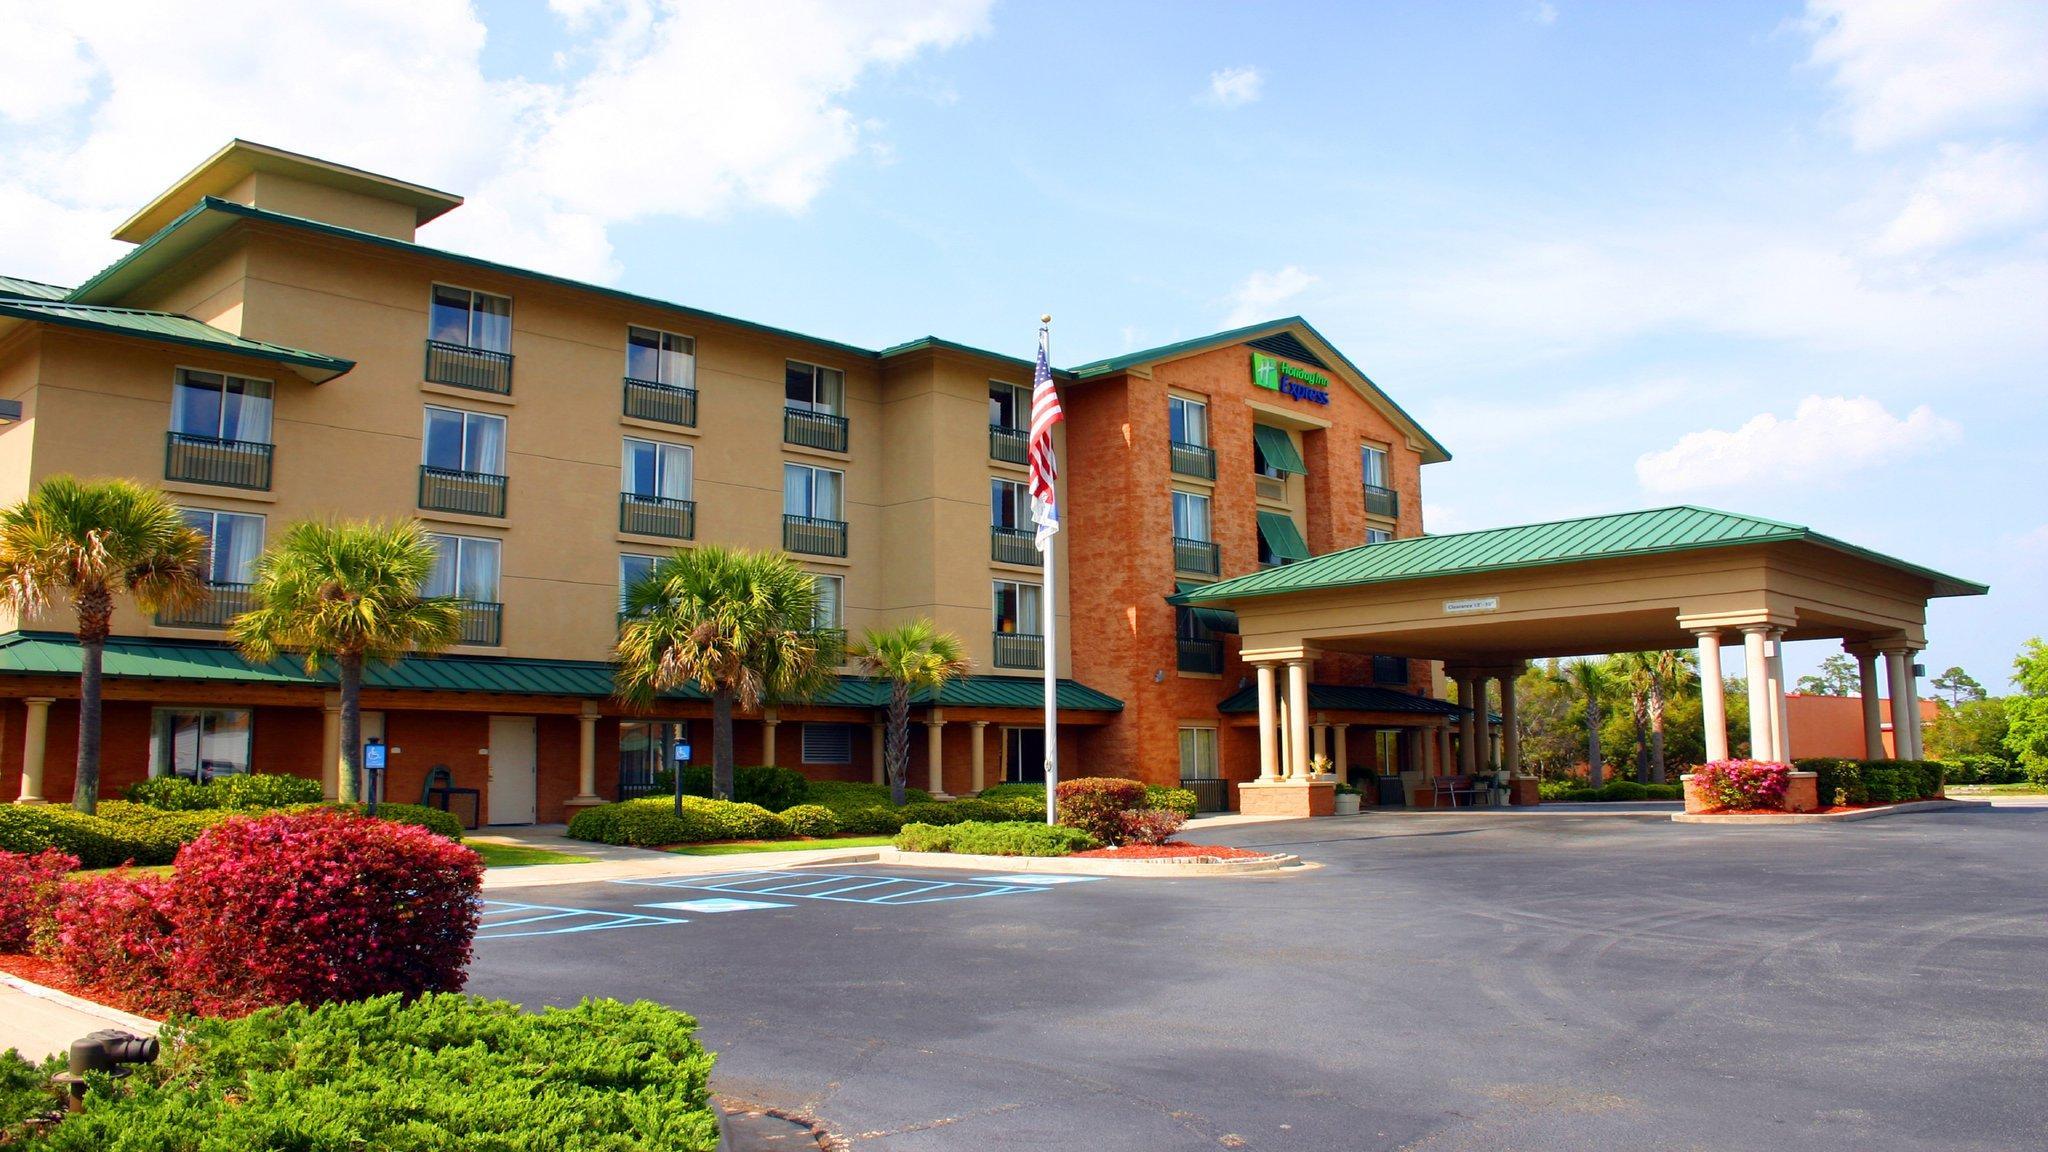 Holiday Inn Express Hotel & Suites Bluffton at Hilton Head Area 写真